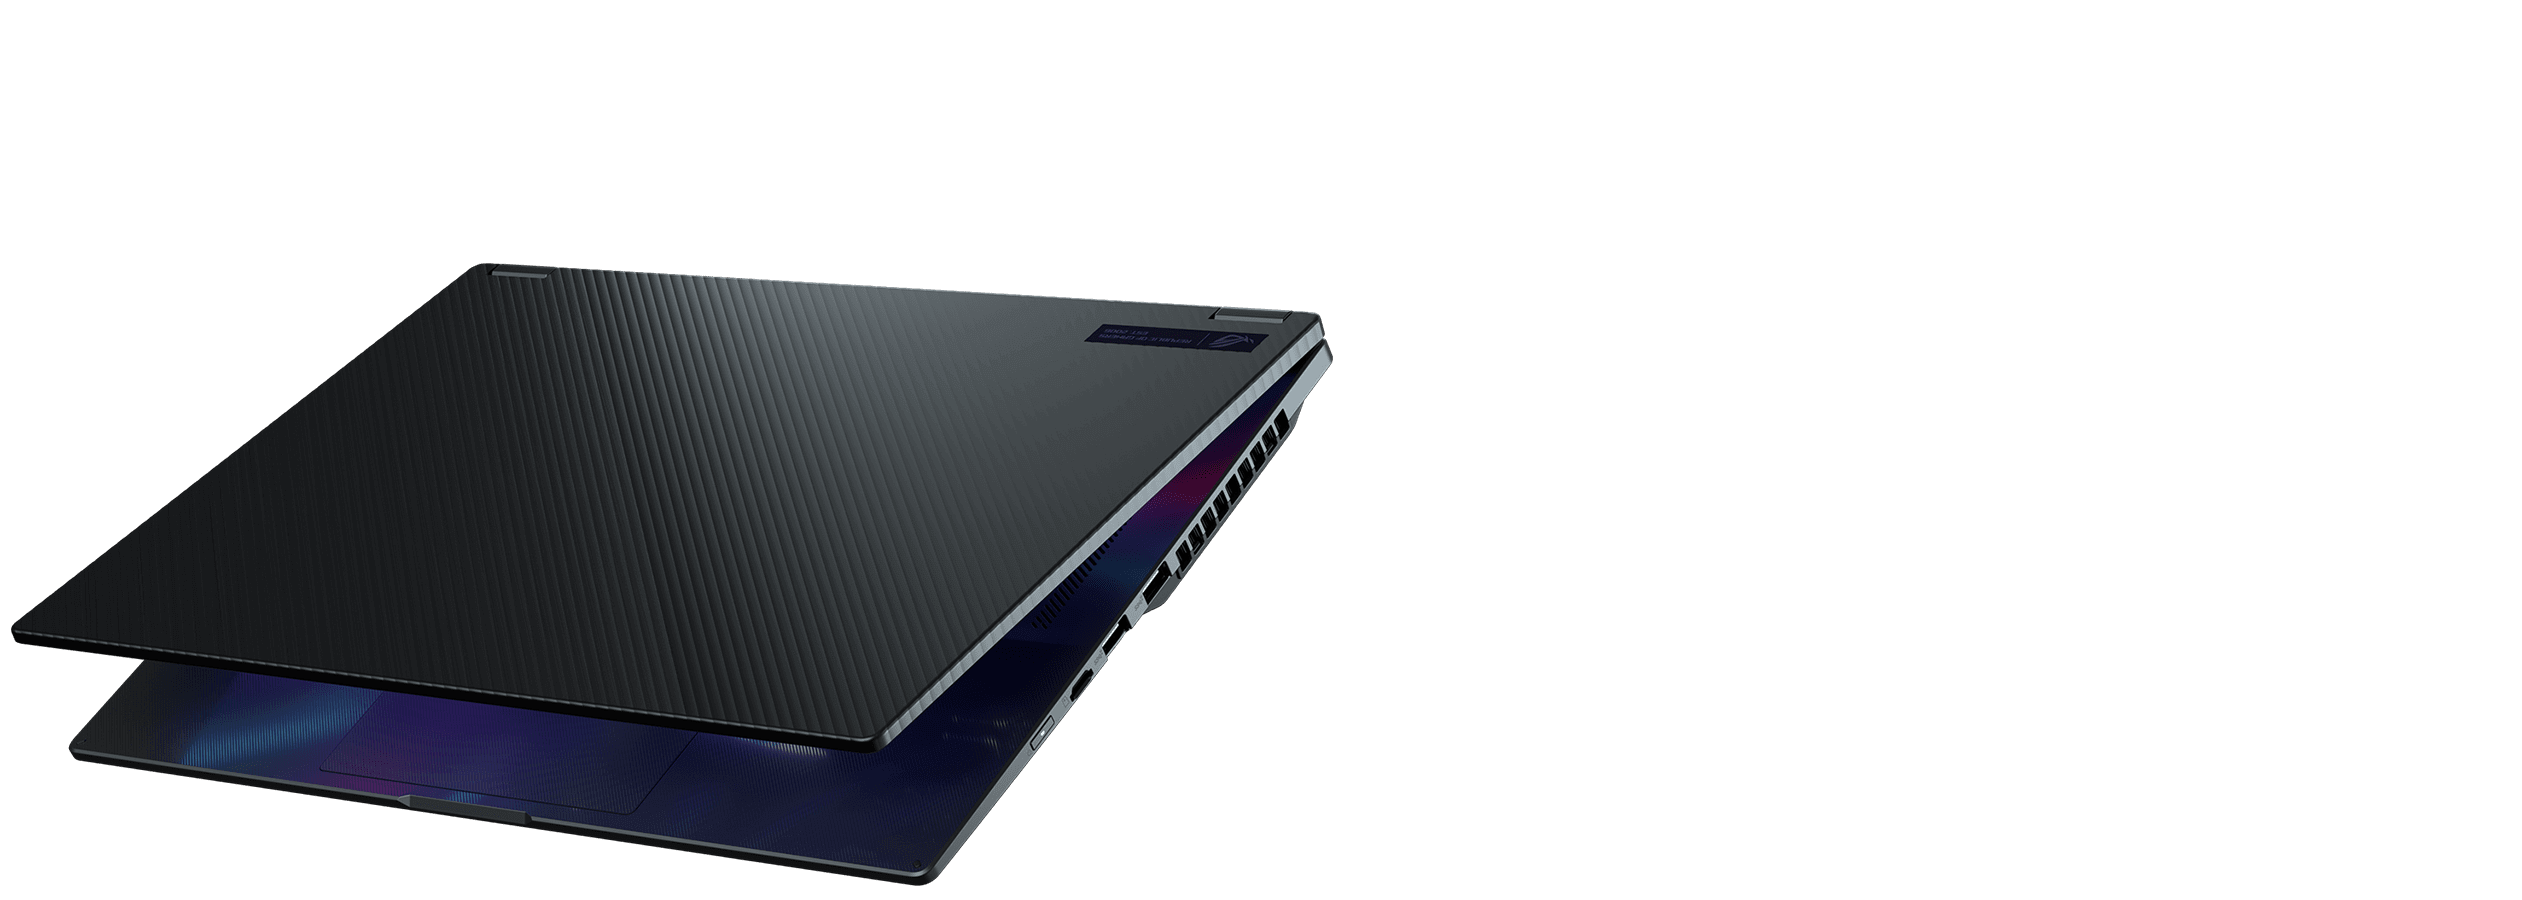 ROG Flow X16 showing the left side IO ports